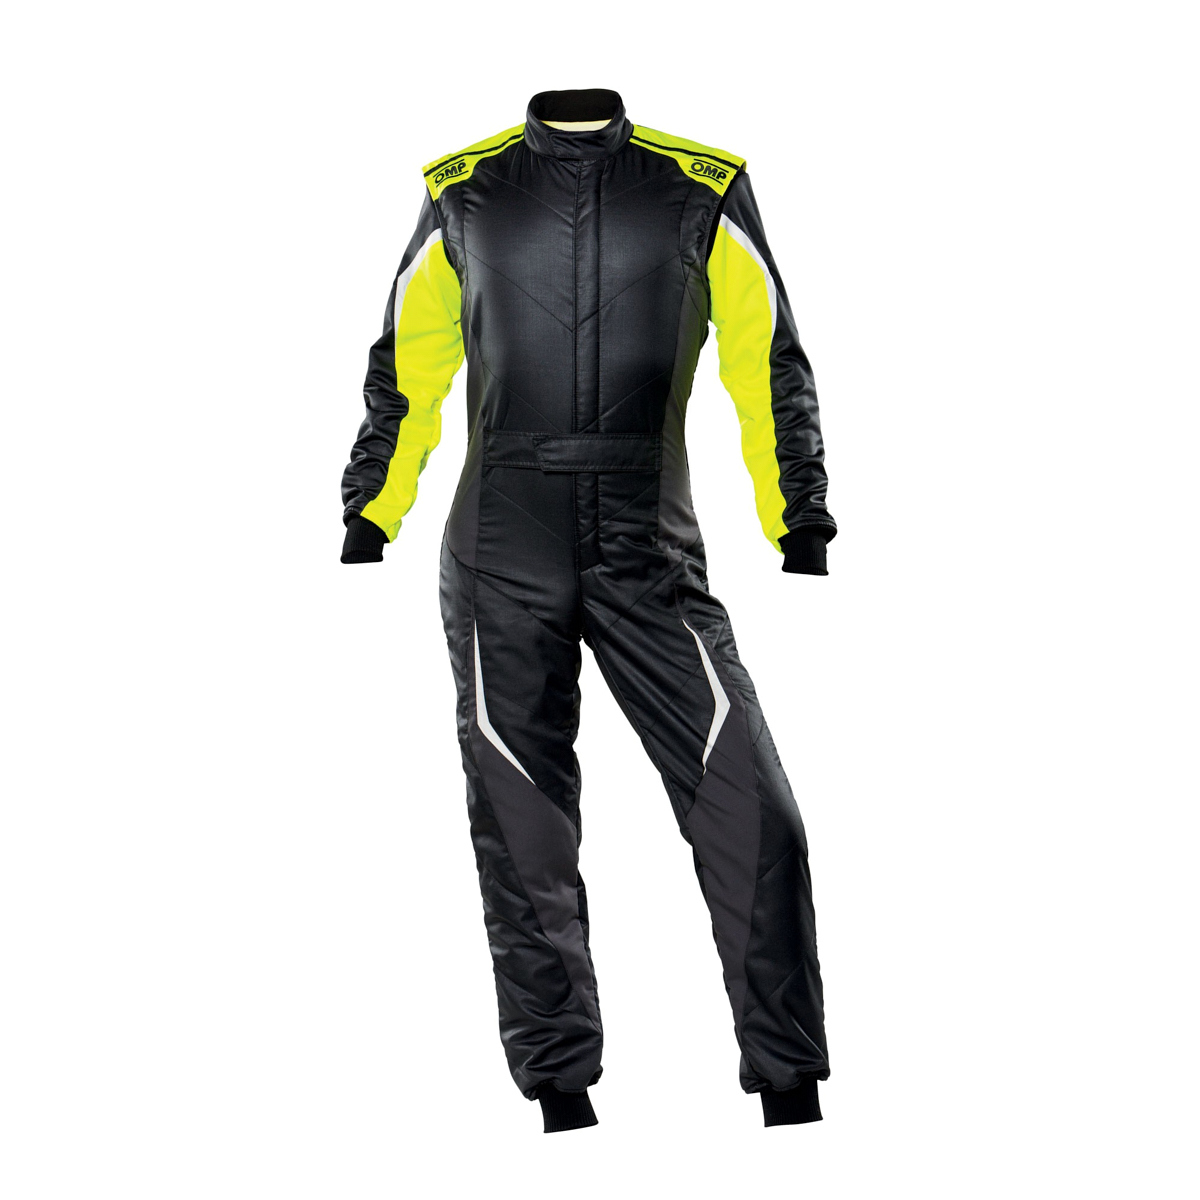 OMP Racing IA01859E17854 Driving Suit, Tecnica Evo, 1-Piece, SFI 3.2A/5, FIA Approved, Double Layer, Fire Retardant Fabric, Black / Fluorescent Yellow, Size 54, Each